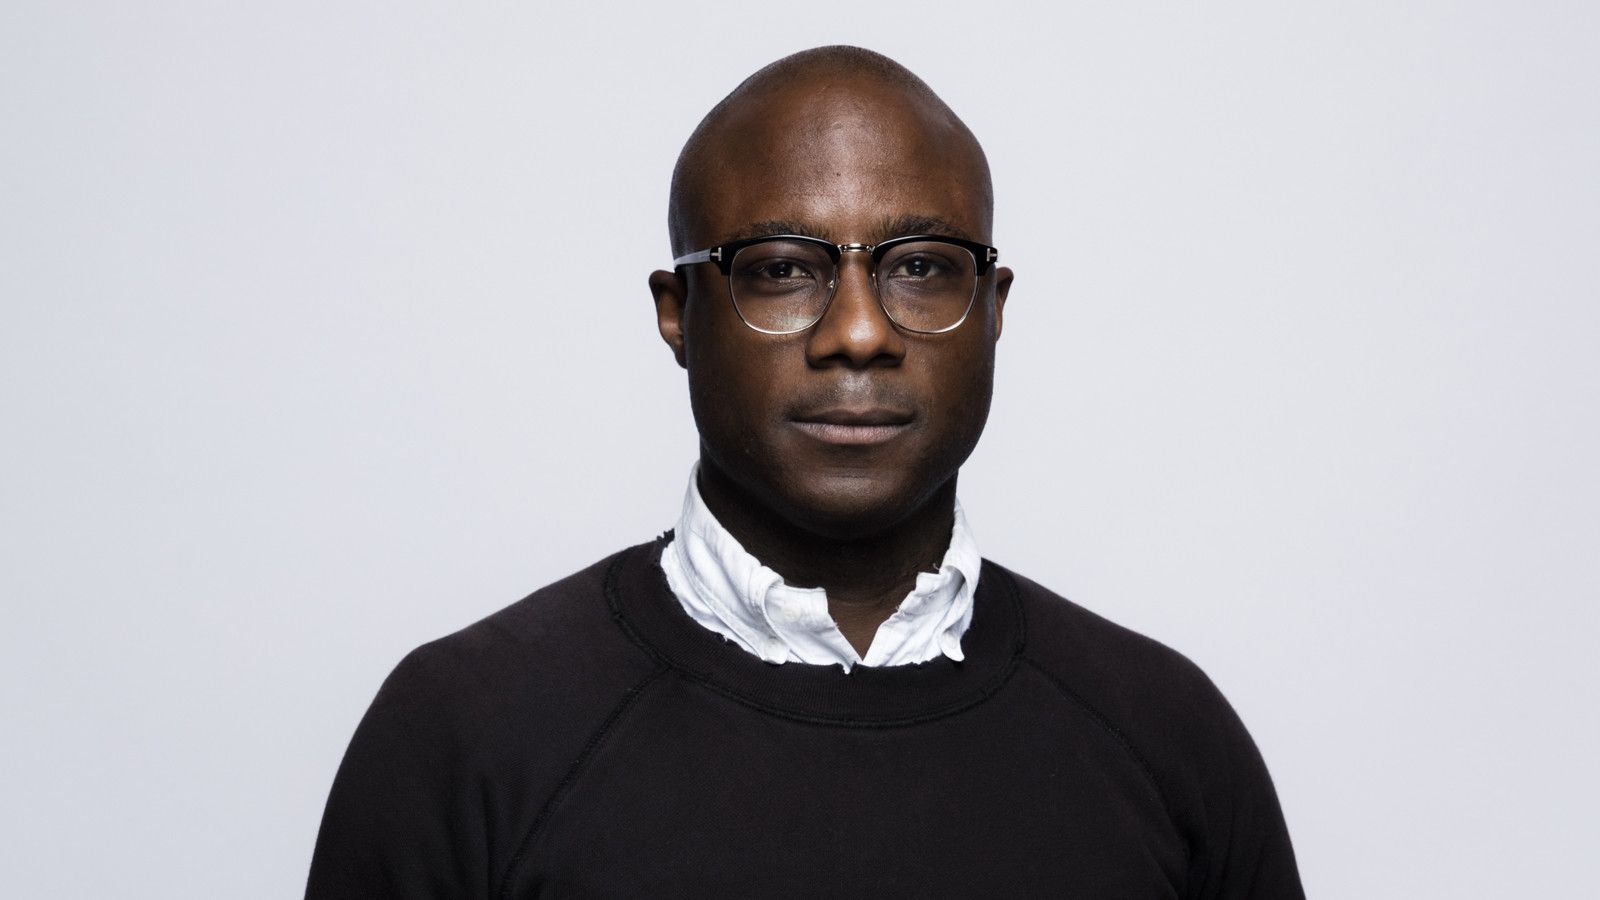 Moonlight Director Barry Jenkins’ Next To Be Based On James Baldwin‘s If Beale Street Could Talk